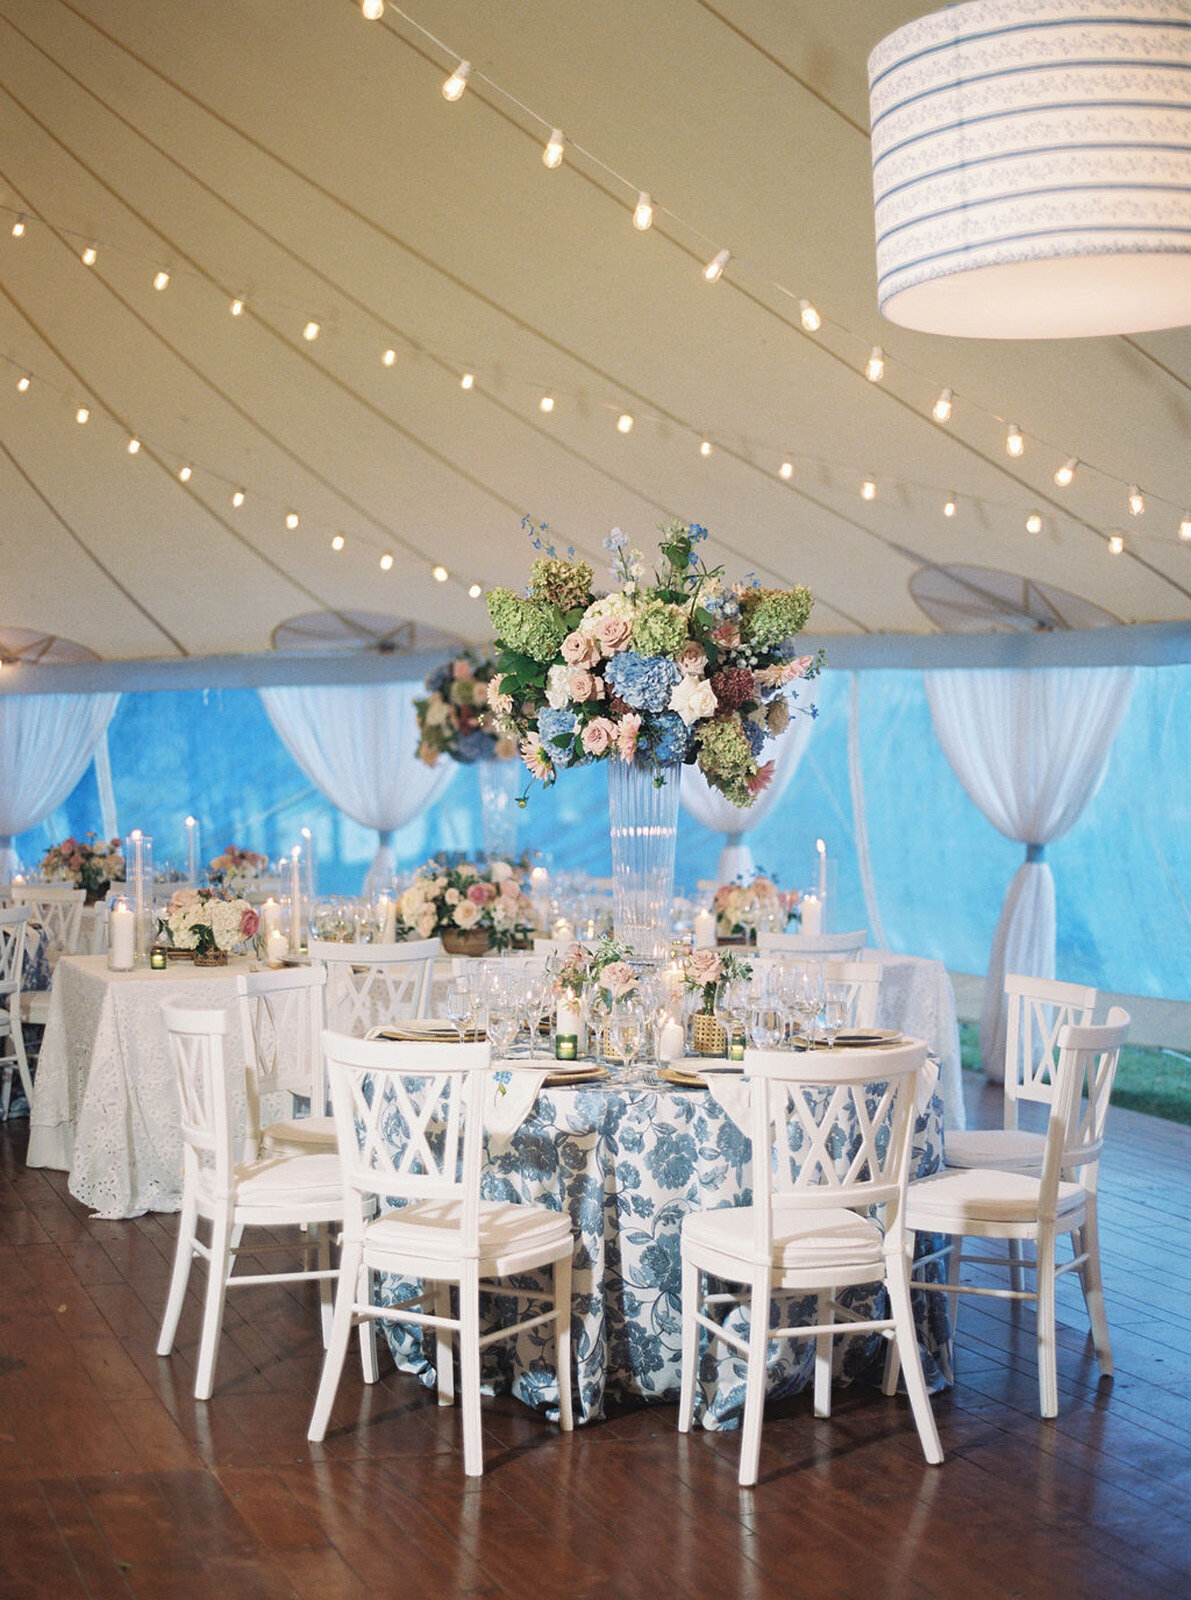 Kate_Murtaugh_Events_Cape_Cod_tented_wedding_dinner_tables